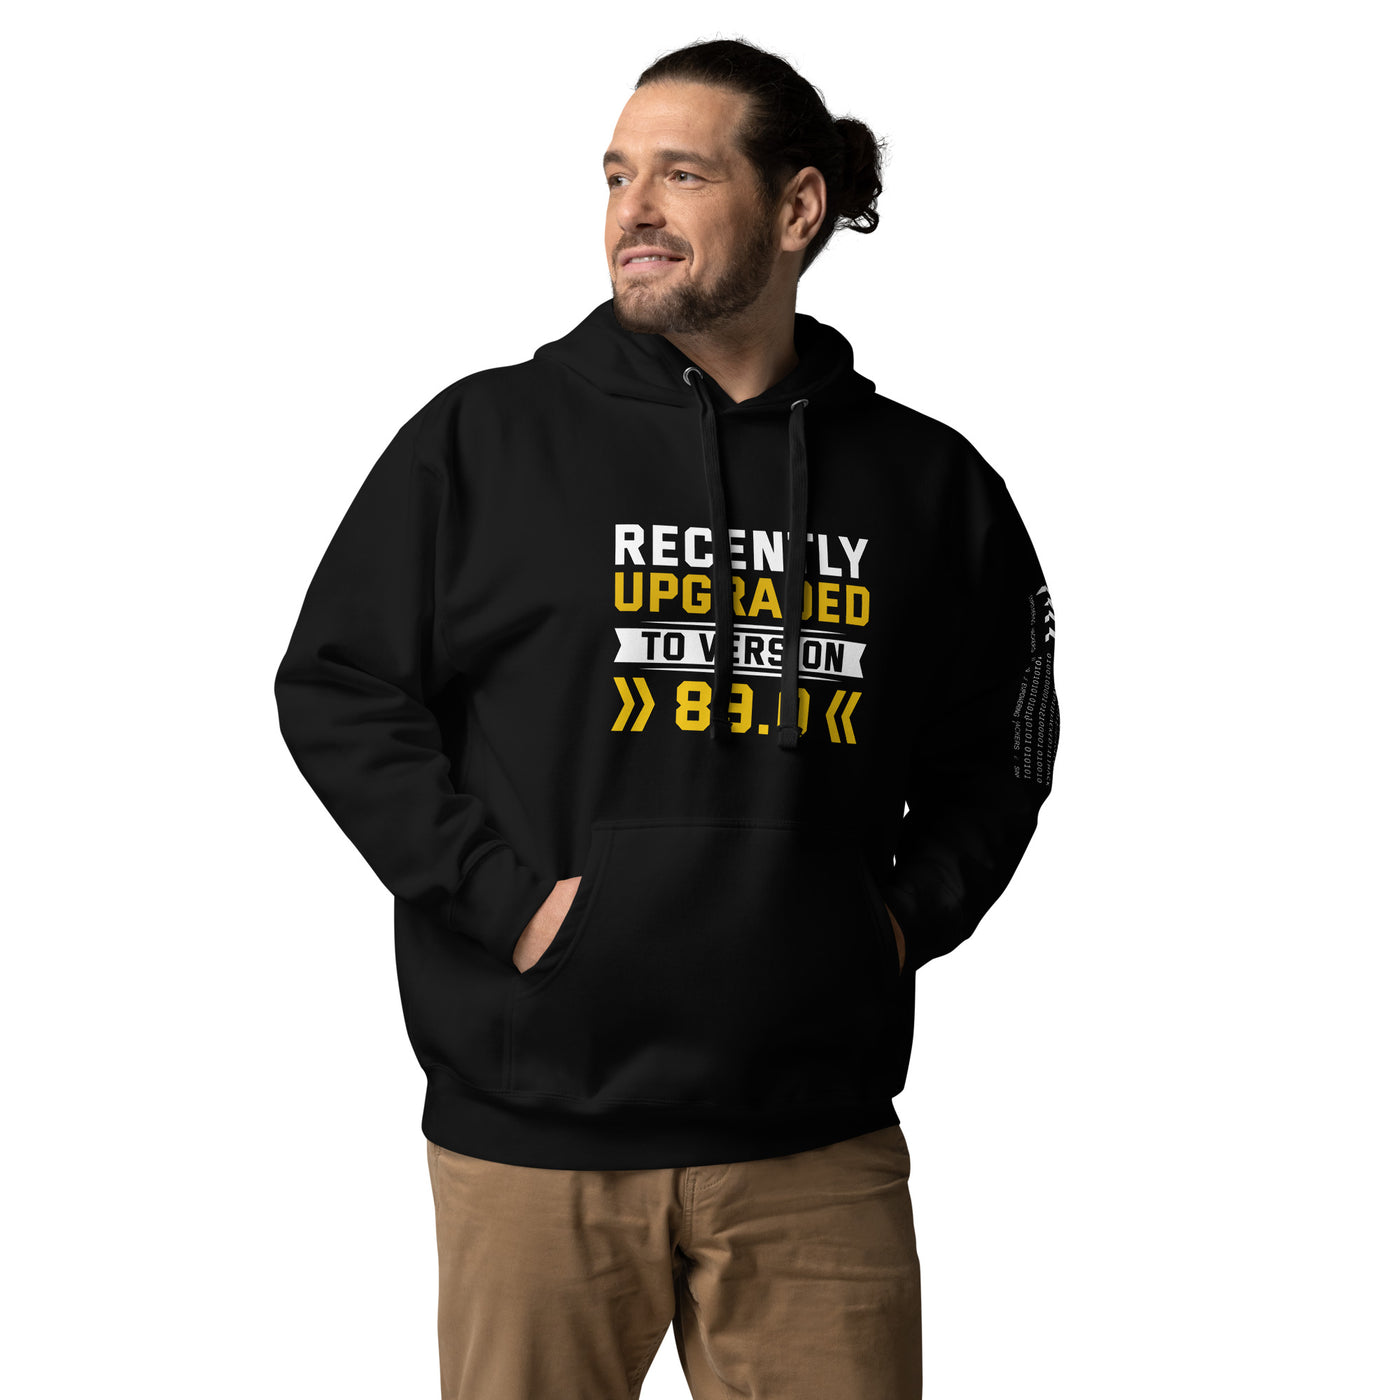 Recently Upgraded to Version >>89.0<< - Unisex Hoodie